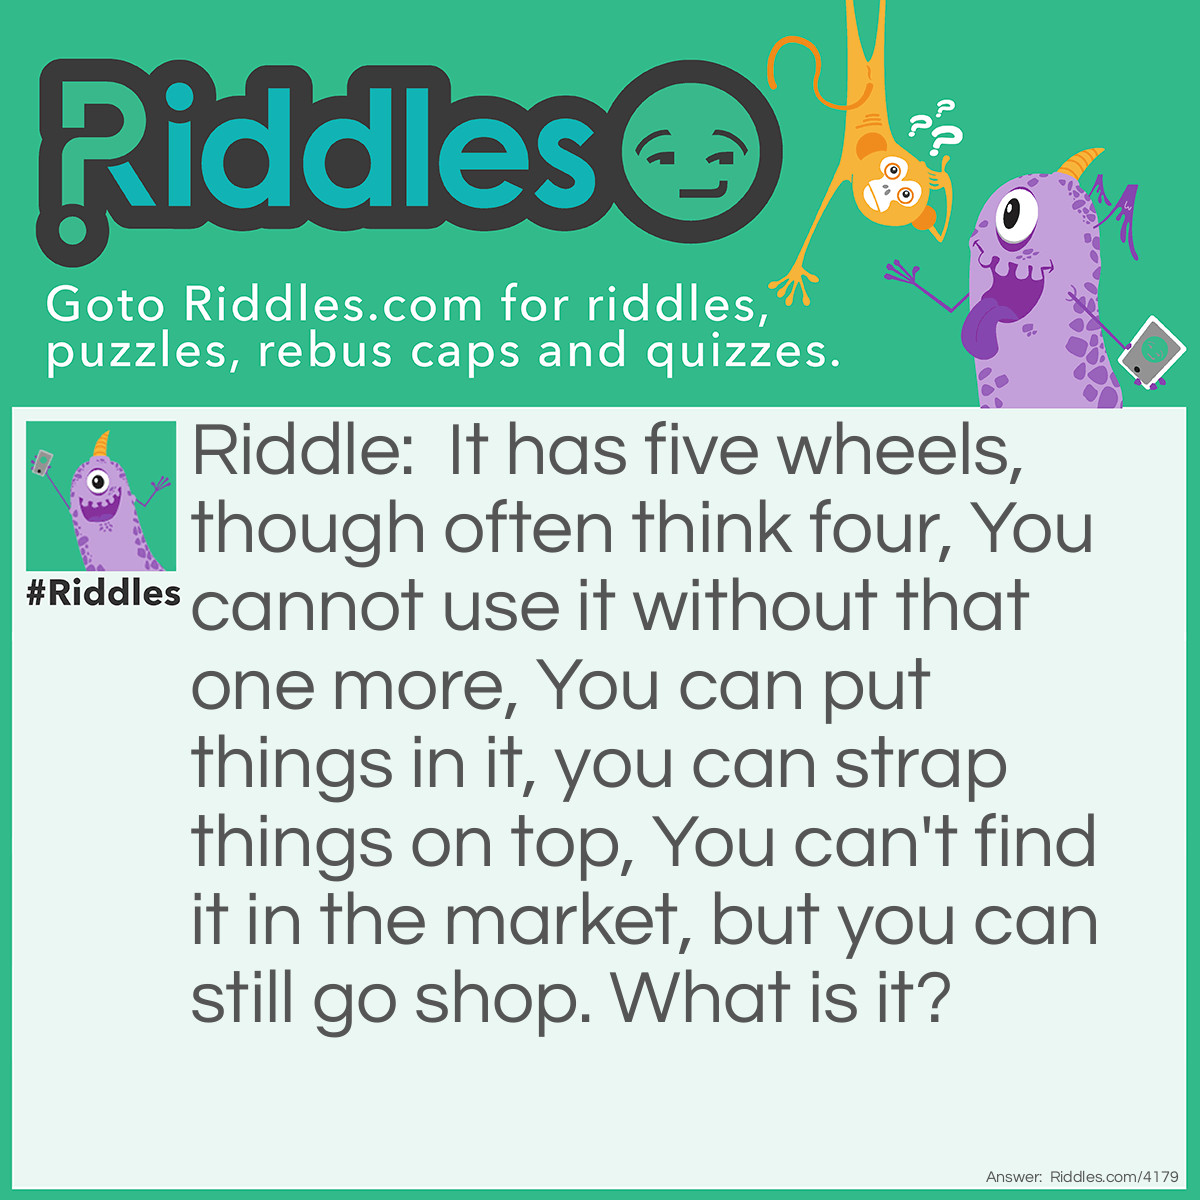 Riddle: It has five wheels, though often think four, You cannot use it without that one more, You can put things in it, you can strap things on top, You can't find it in the market, but you can still go shop. What is it? Answer: A car.